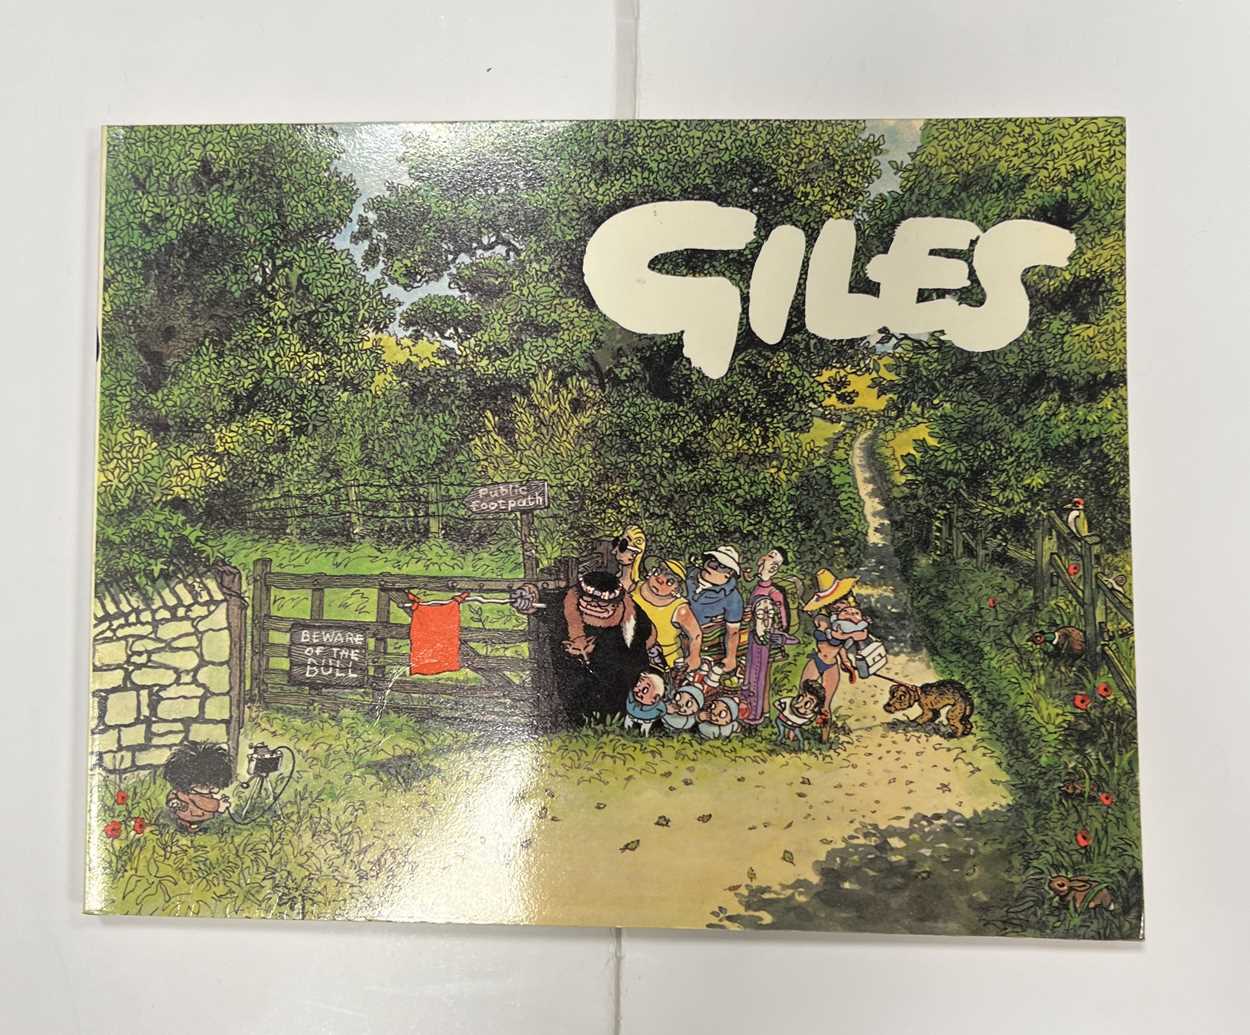 Giles - A collection of cartoon annuals from 1959, 1960, 1967, 1968, 1969, 1970, 1971, 1976, 1979, - Image 3 of 19